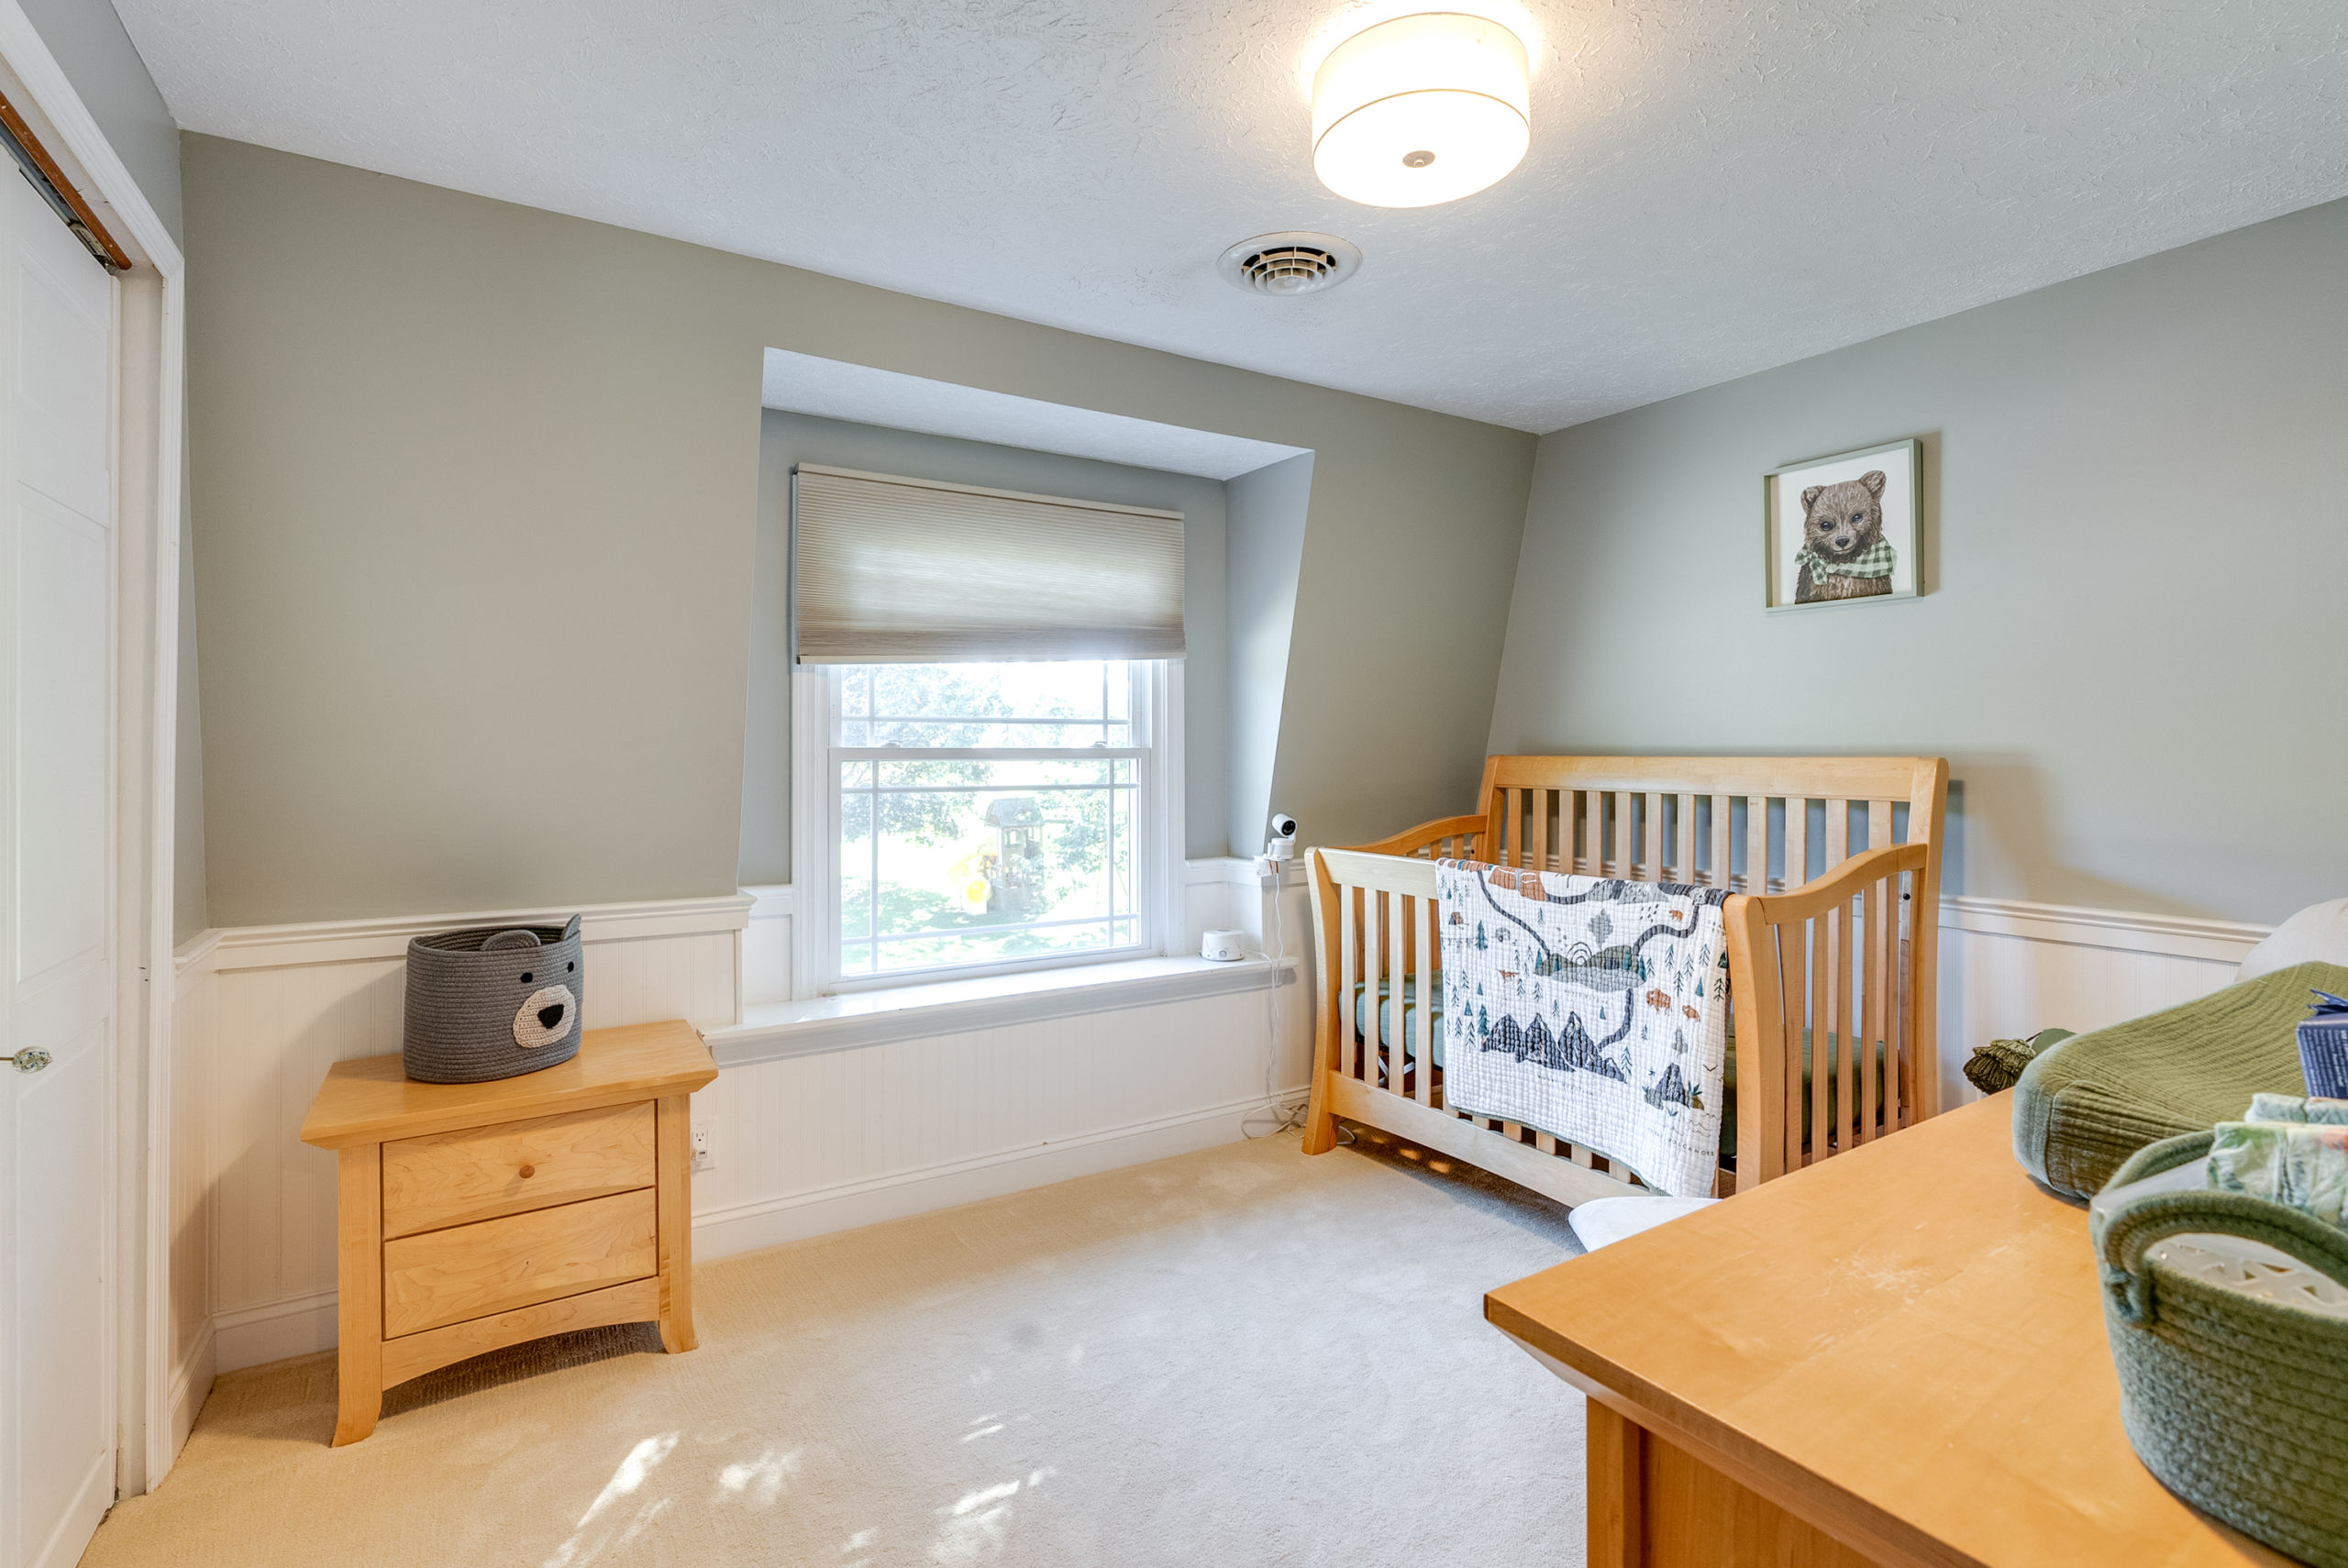 Custom baby room build adjacent to the primary bedroom